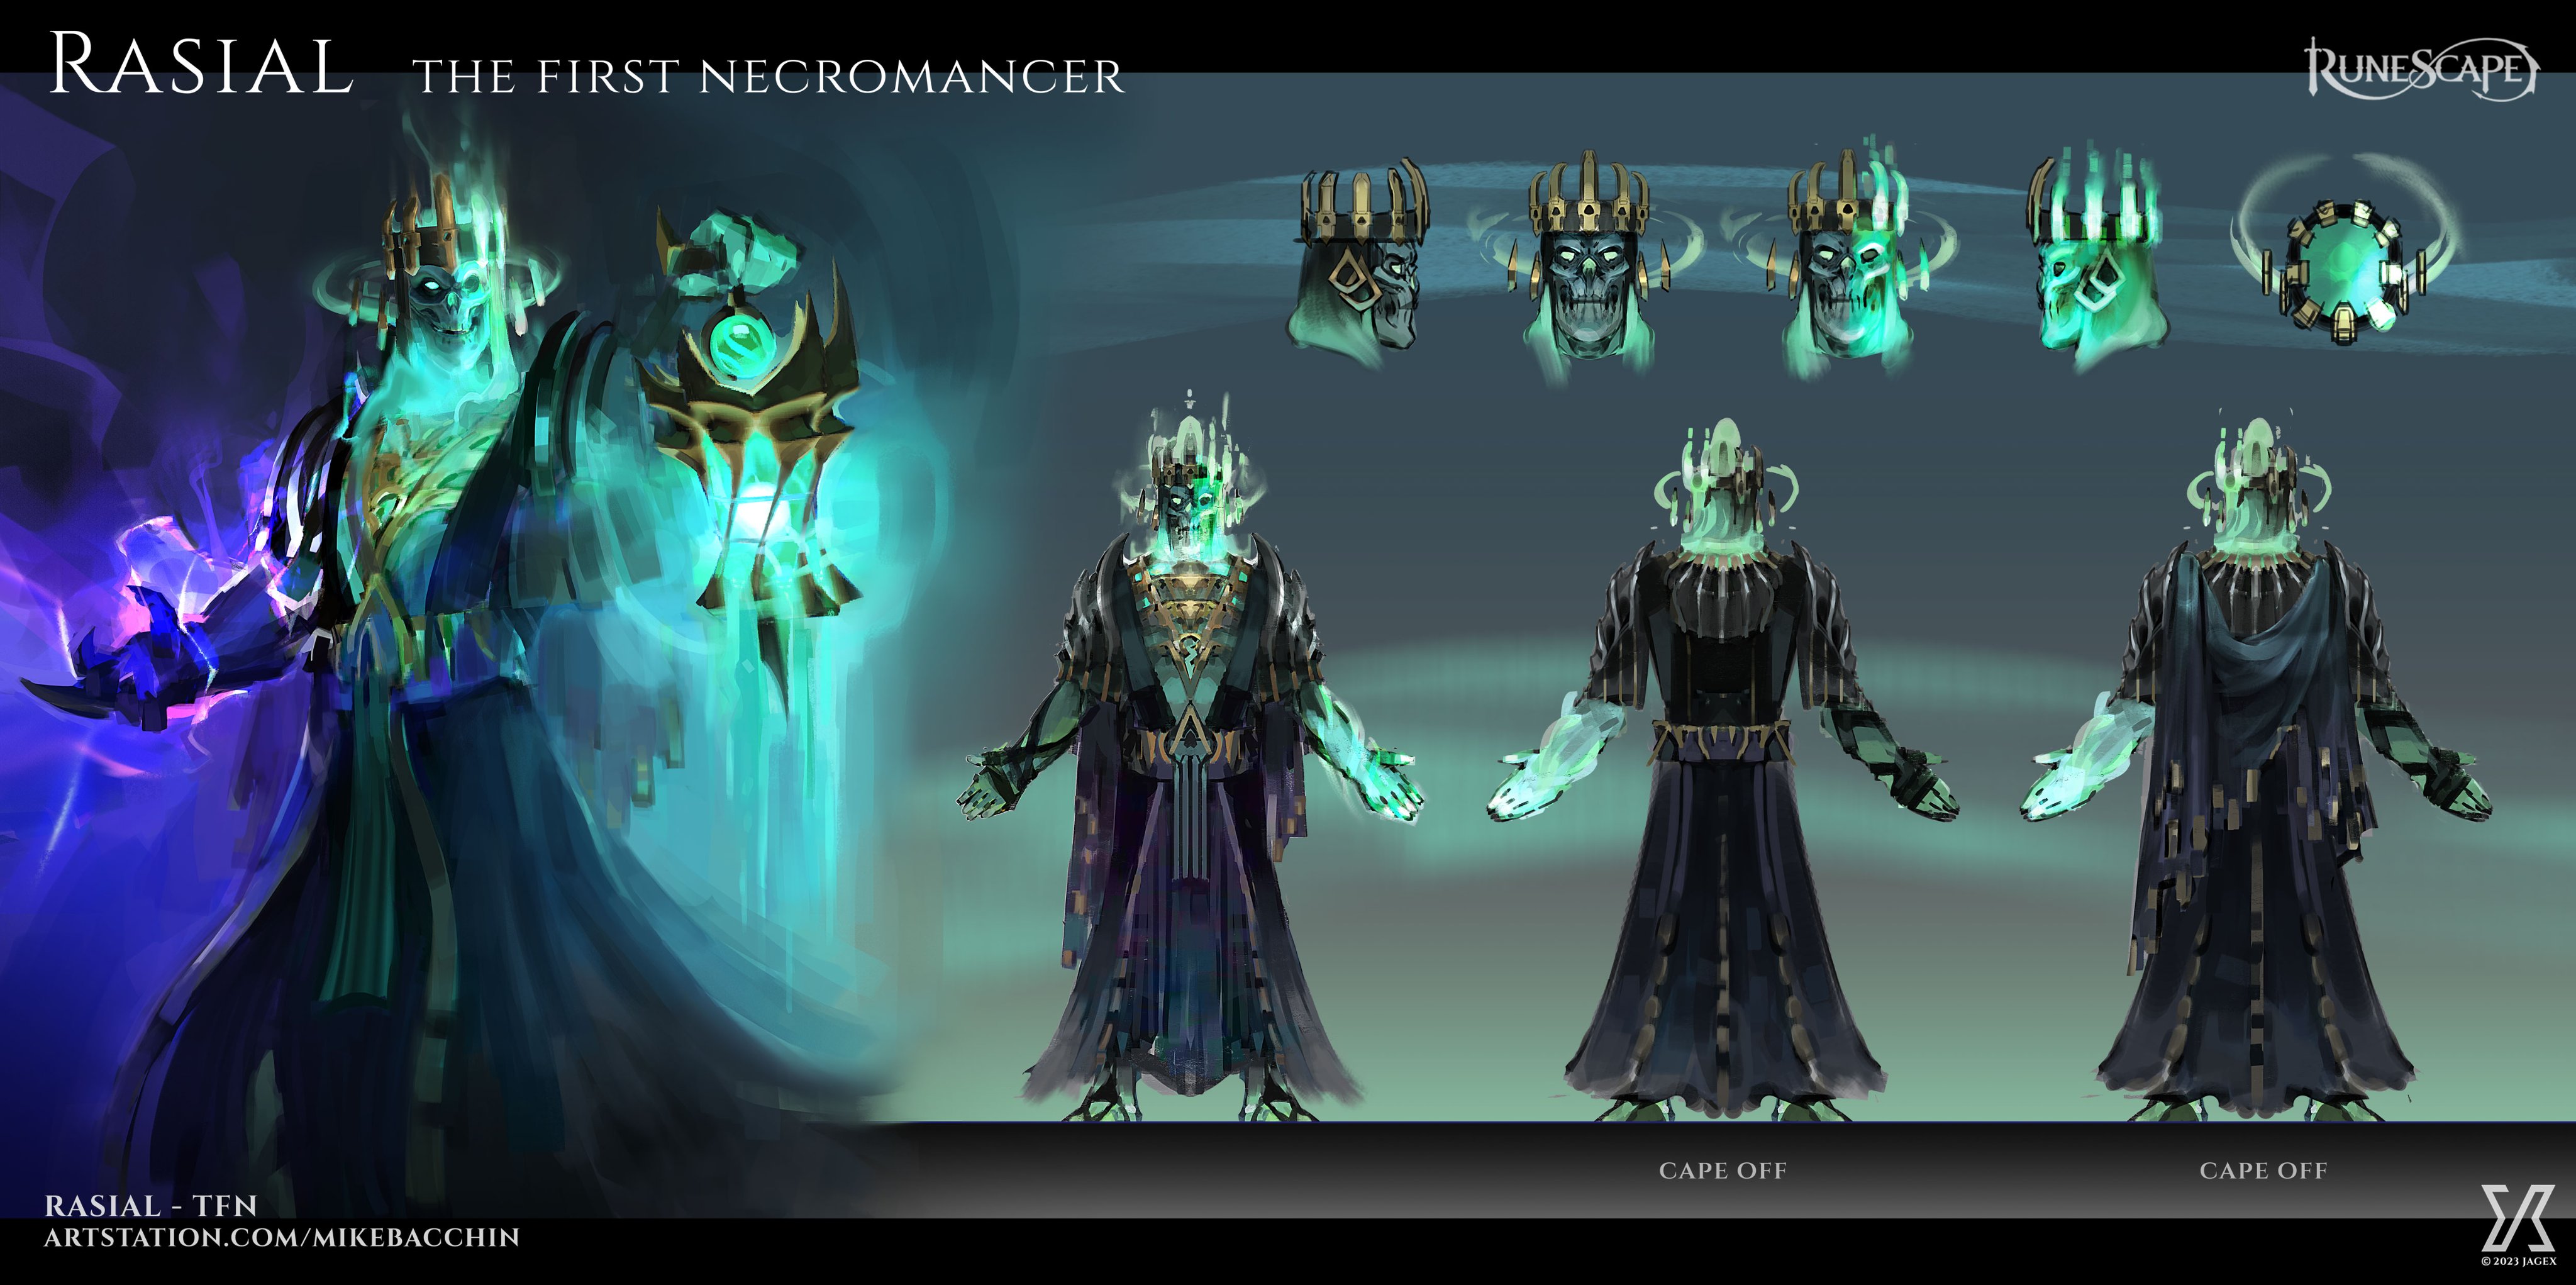 RS3) Necromancy First Look!!! will this be FUN?! 